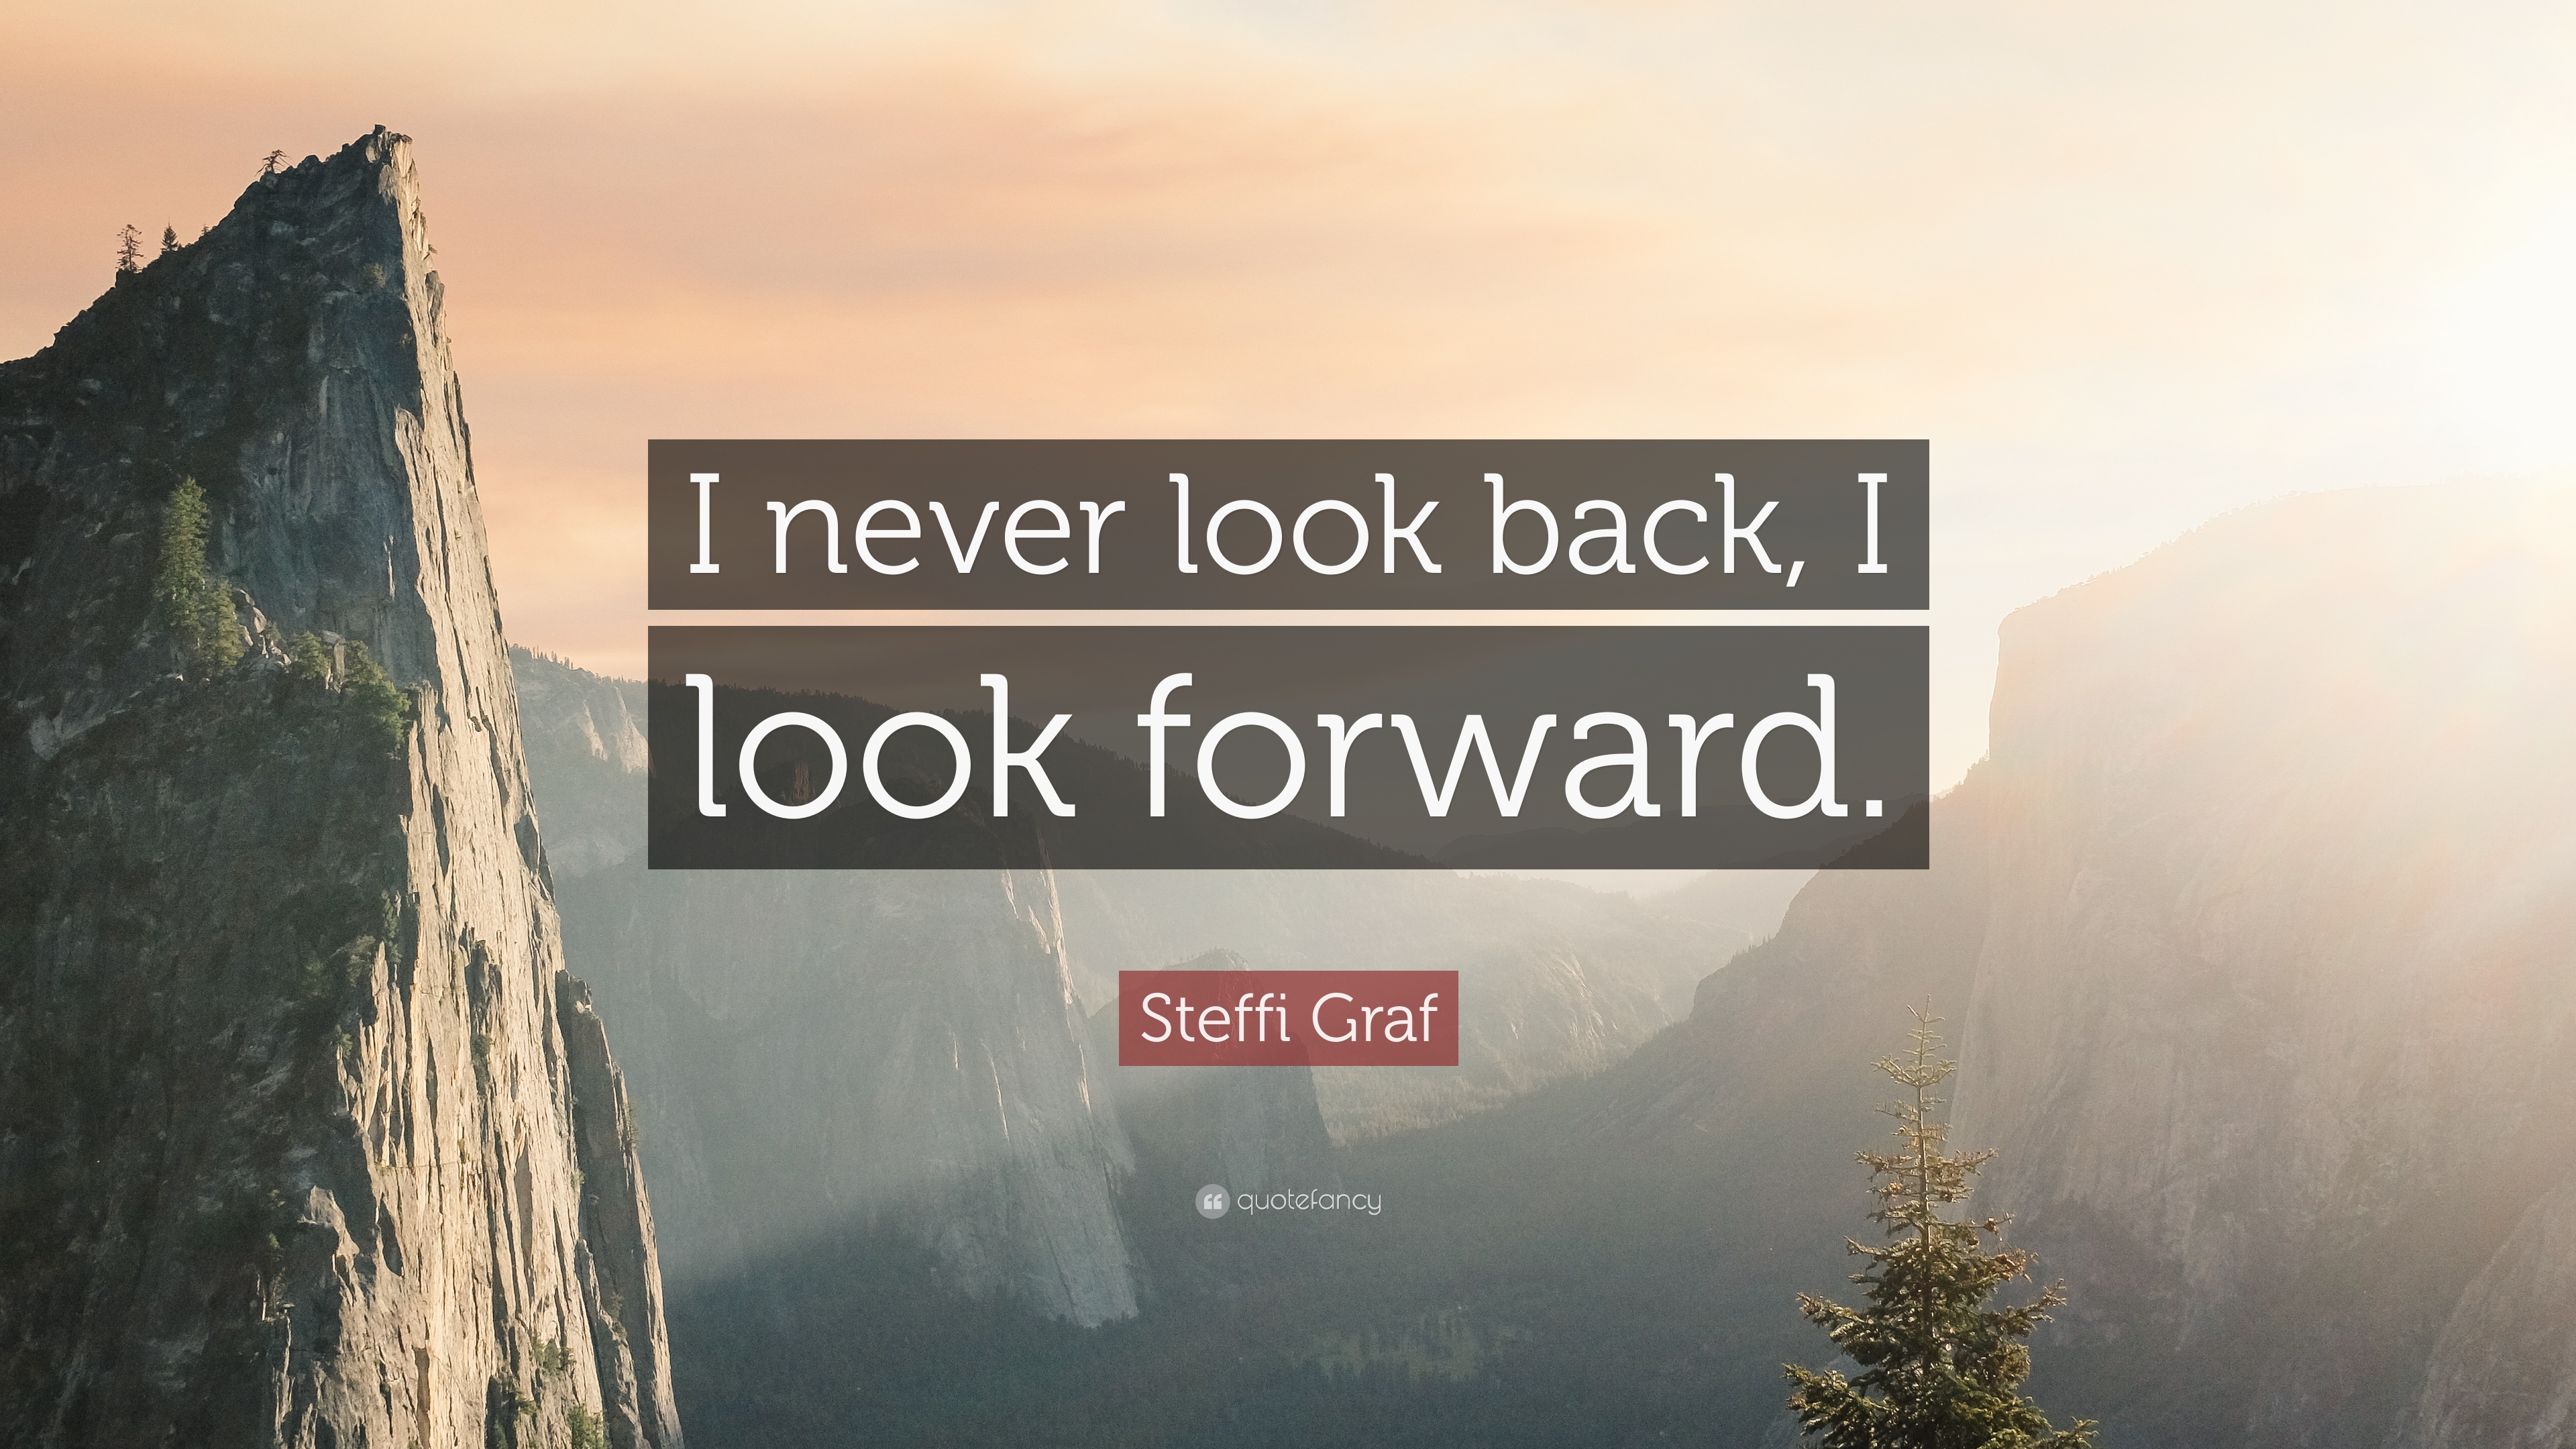 Steffi Graf Quote: “I never look back, I look forward.” 12